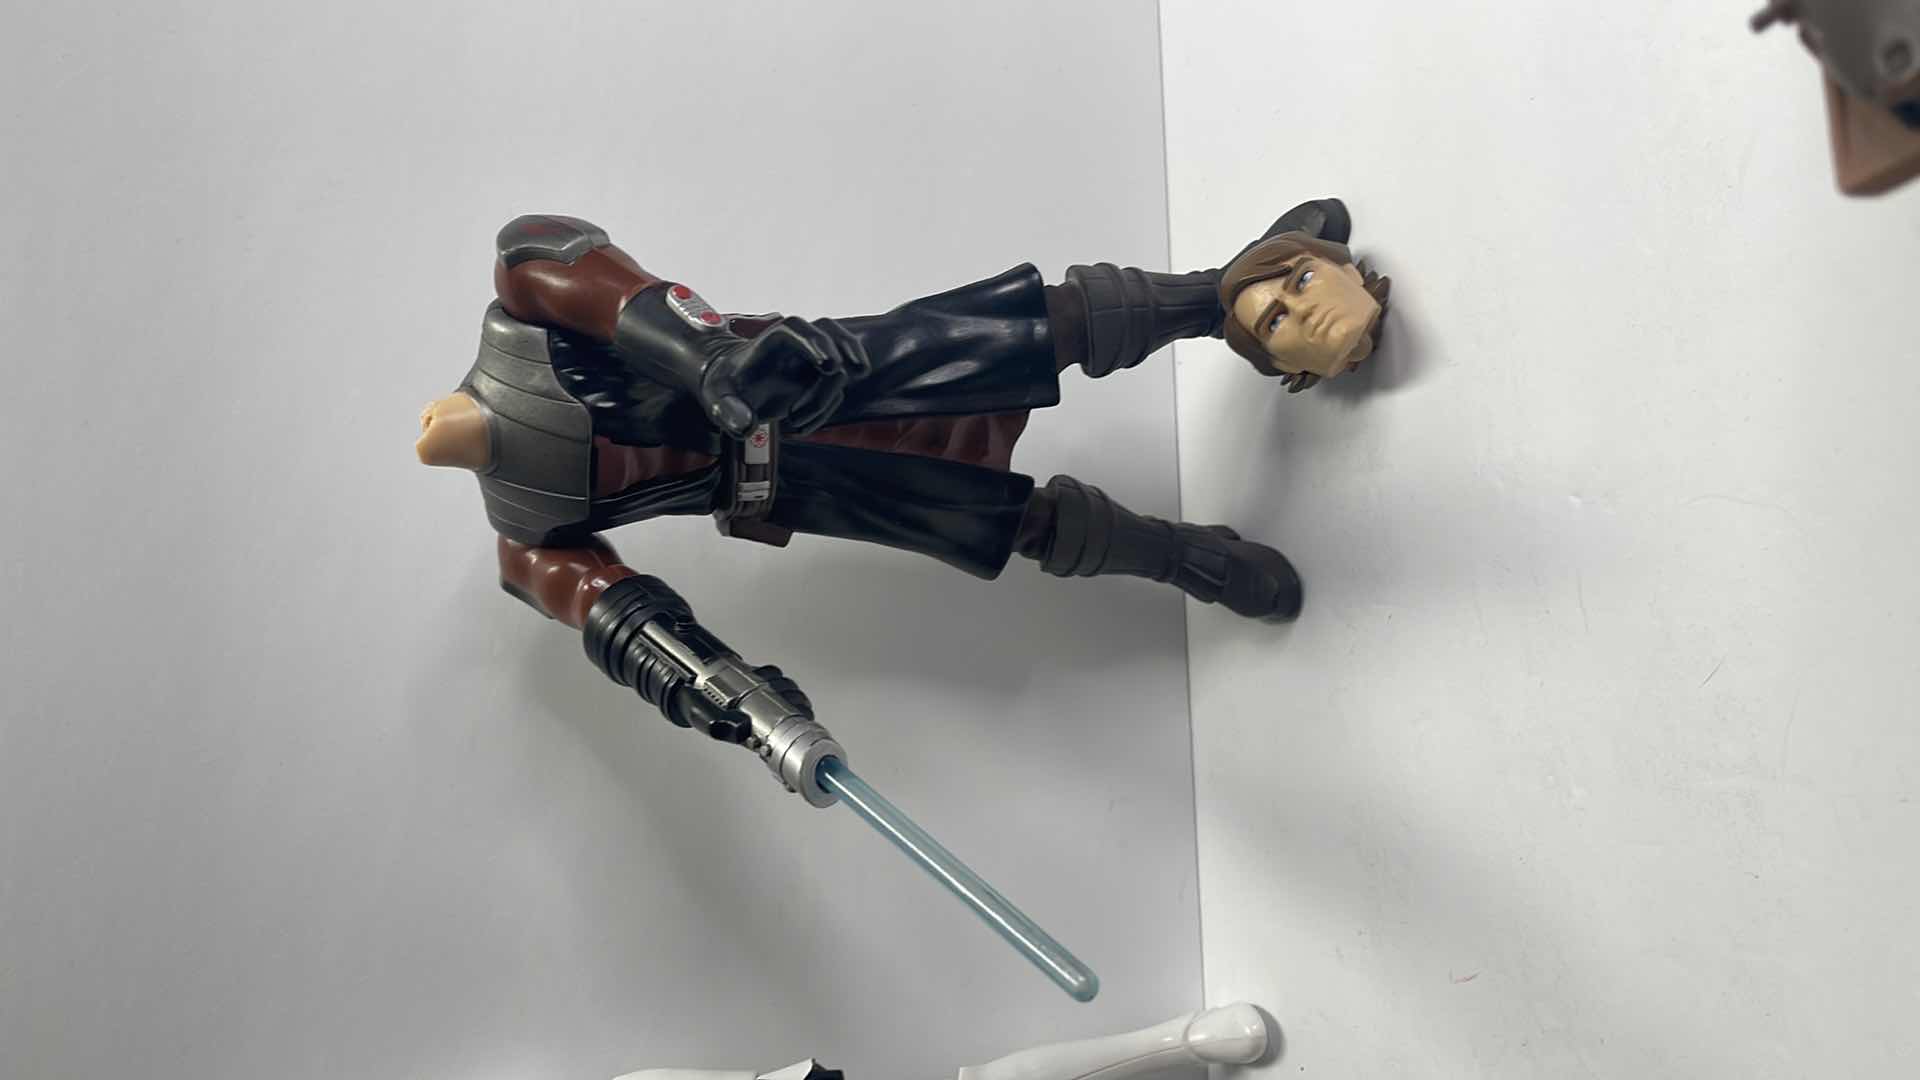 Photo 3 of STAR WARS ACTION FIGURE 2009 ANAKIN SKYWALKER TALKING FEATURE WORKS, LARGE 10IN - RETAIL PRICE $20.00